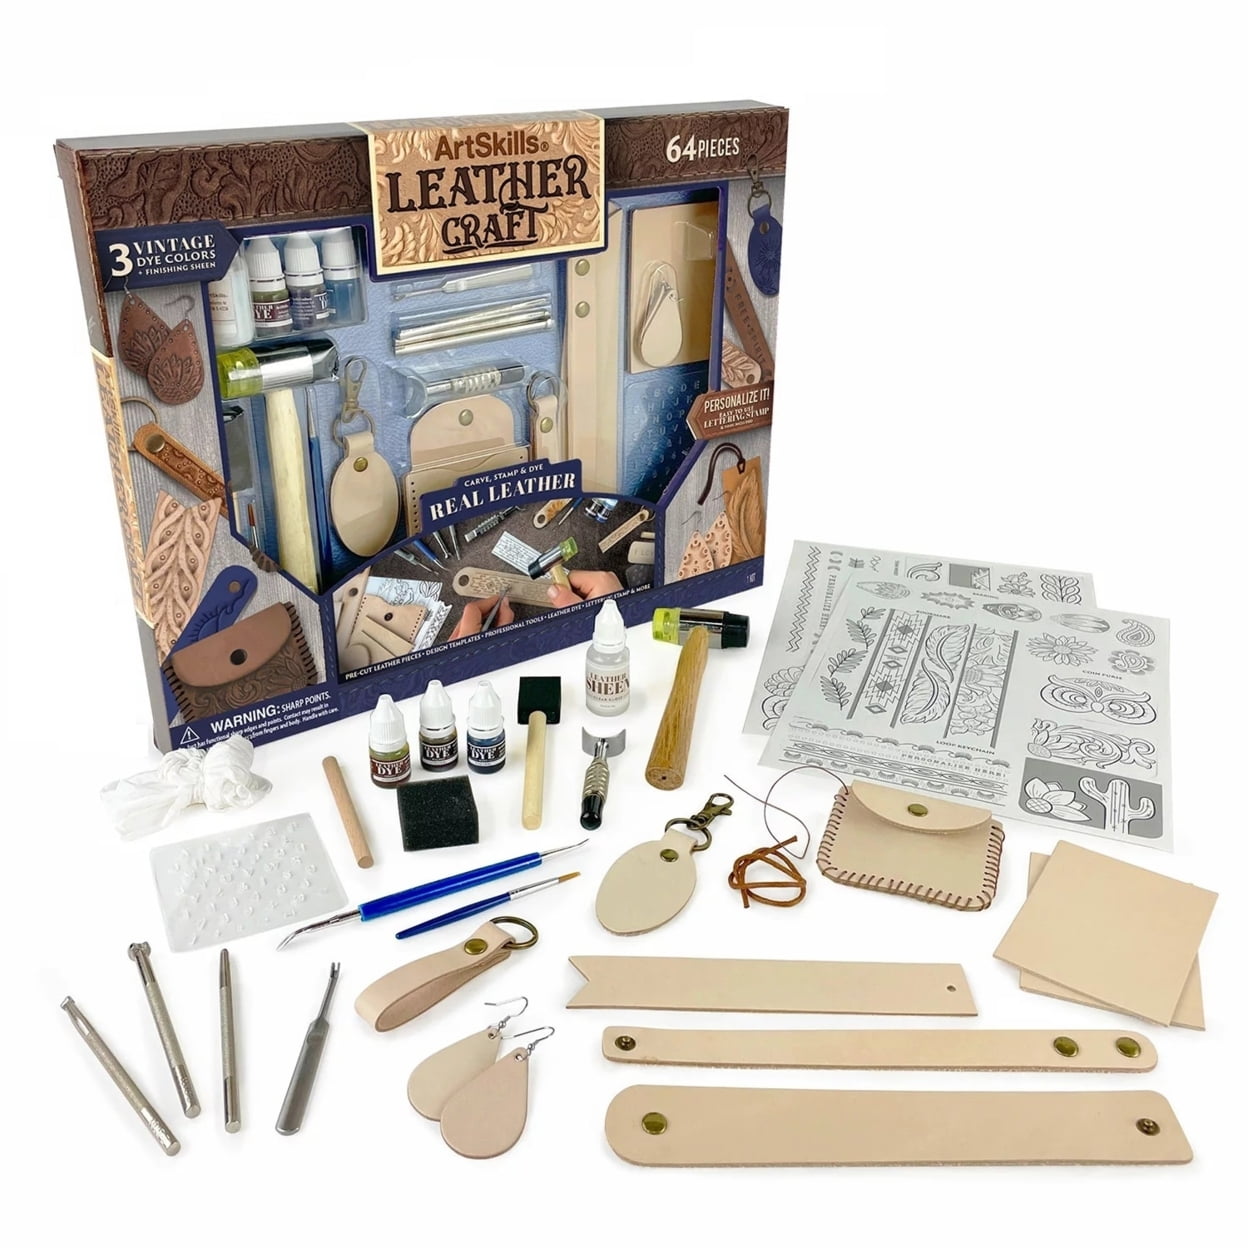 Workshop Starter Set from Tandy Leather